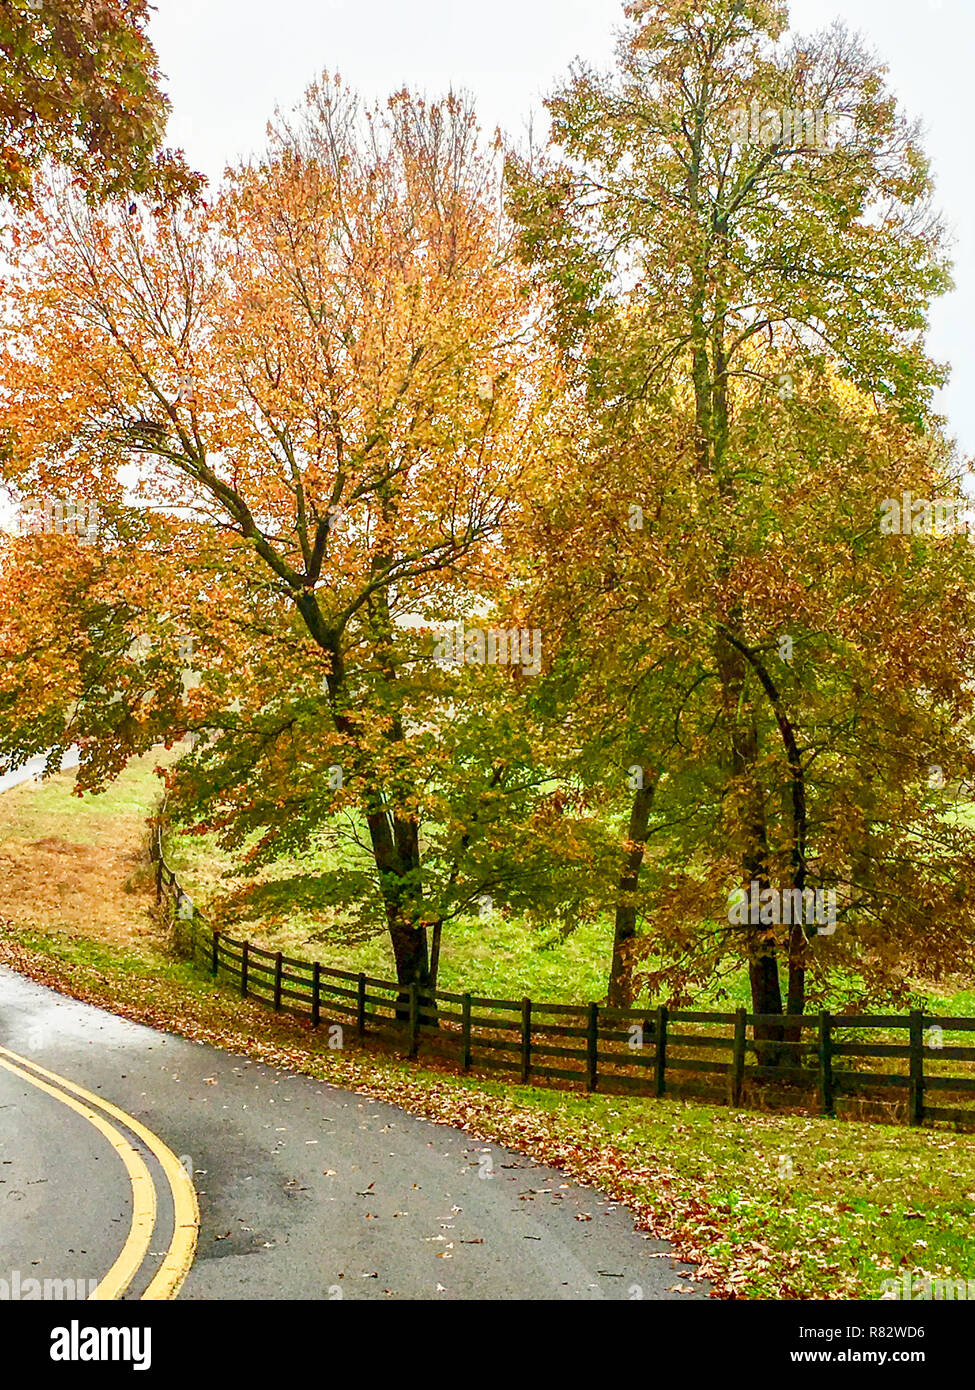 Autumn Landscape Road and Fenced Pasture Stock Photo